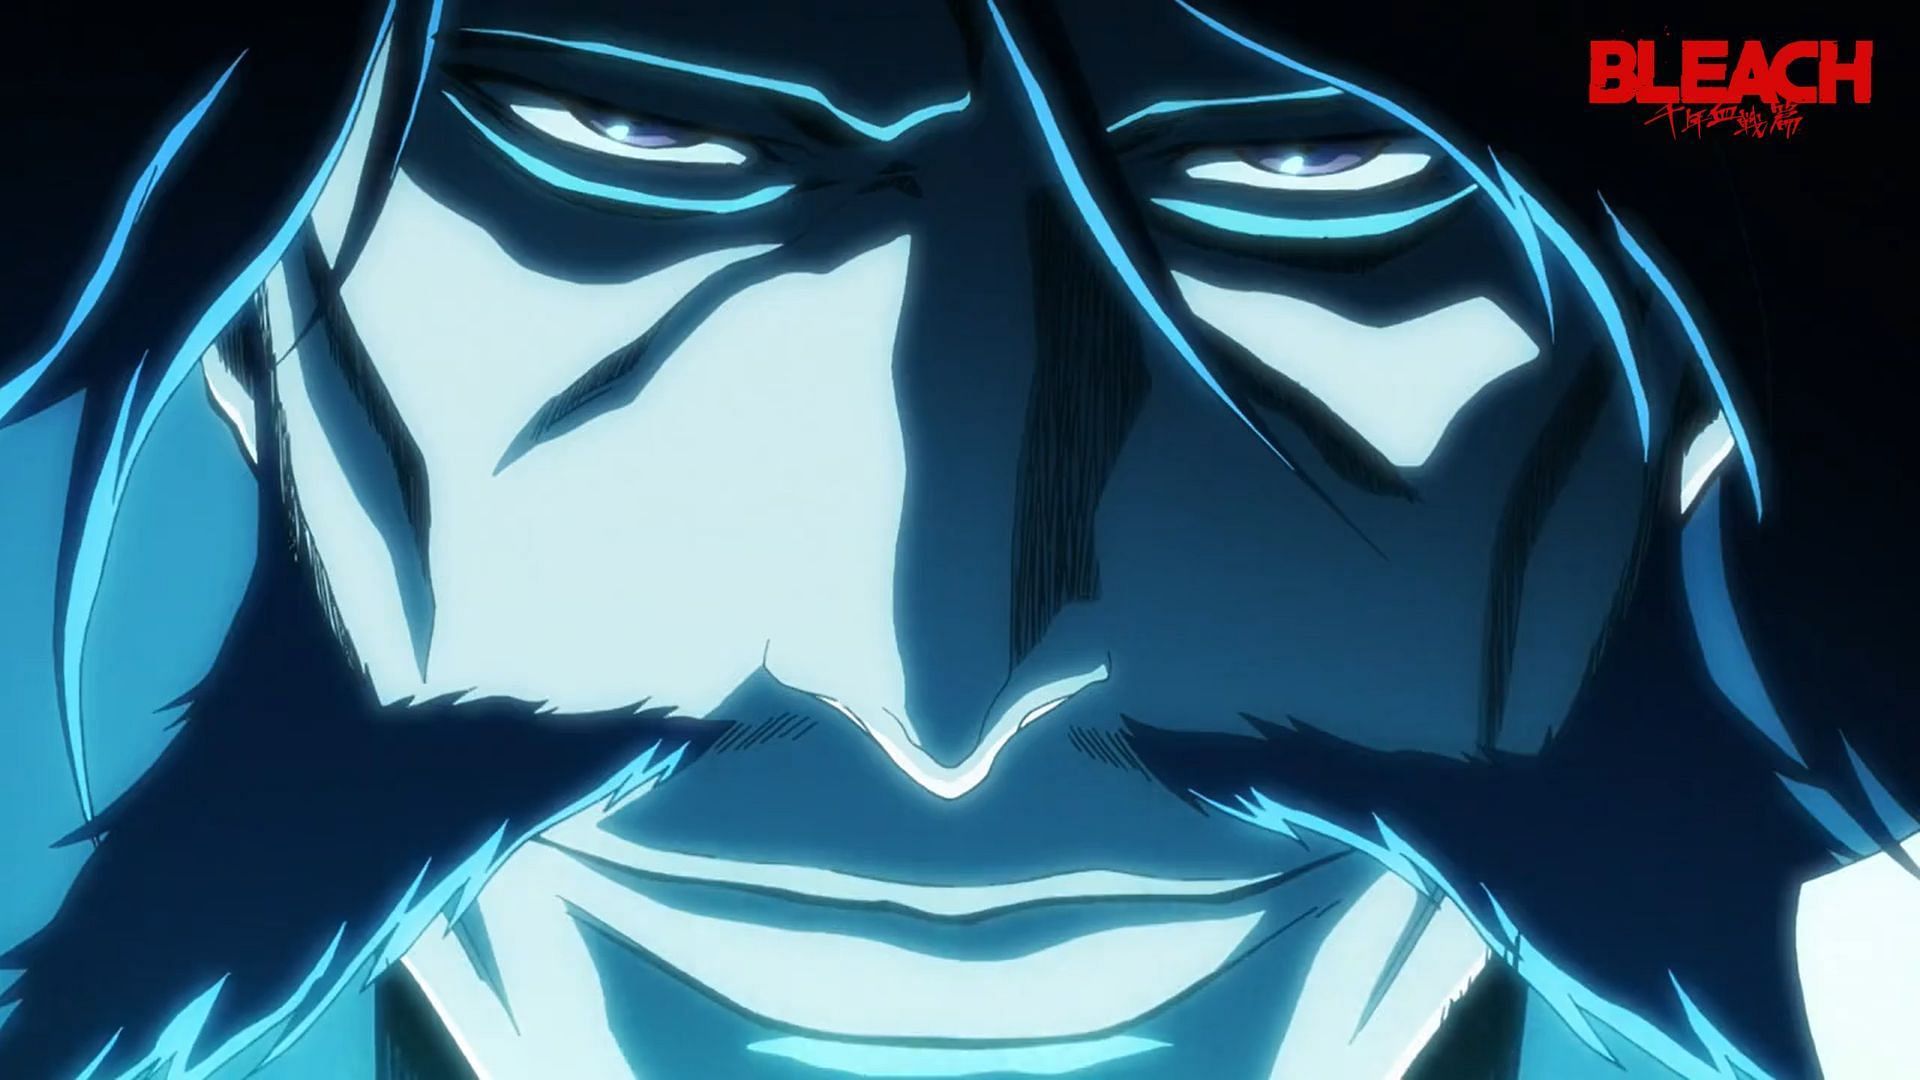 Bleach: Thousand-Year Blood War episode 1: Soul Society faces new